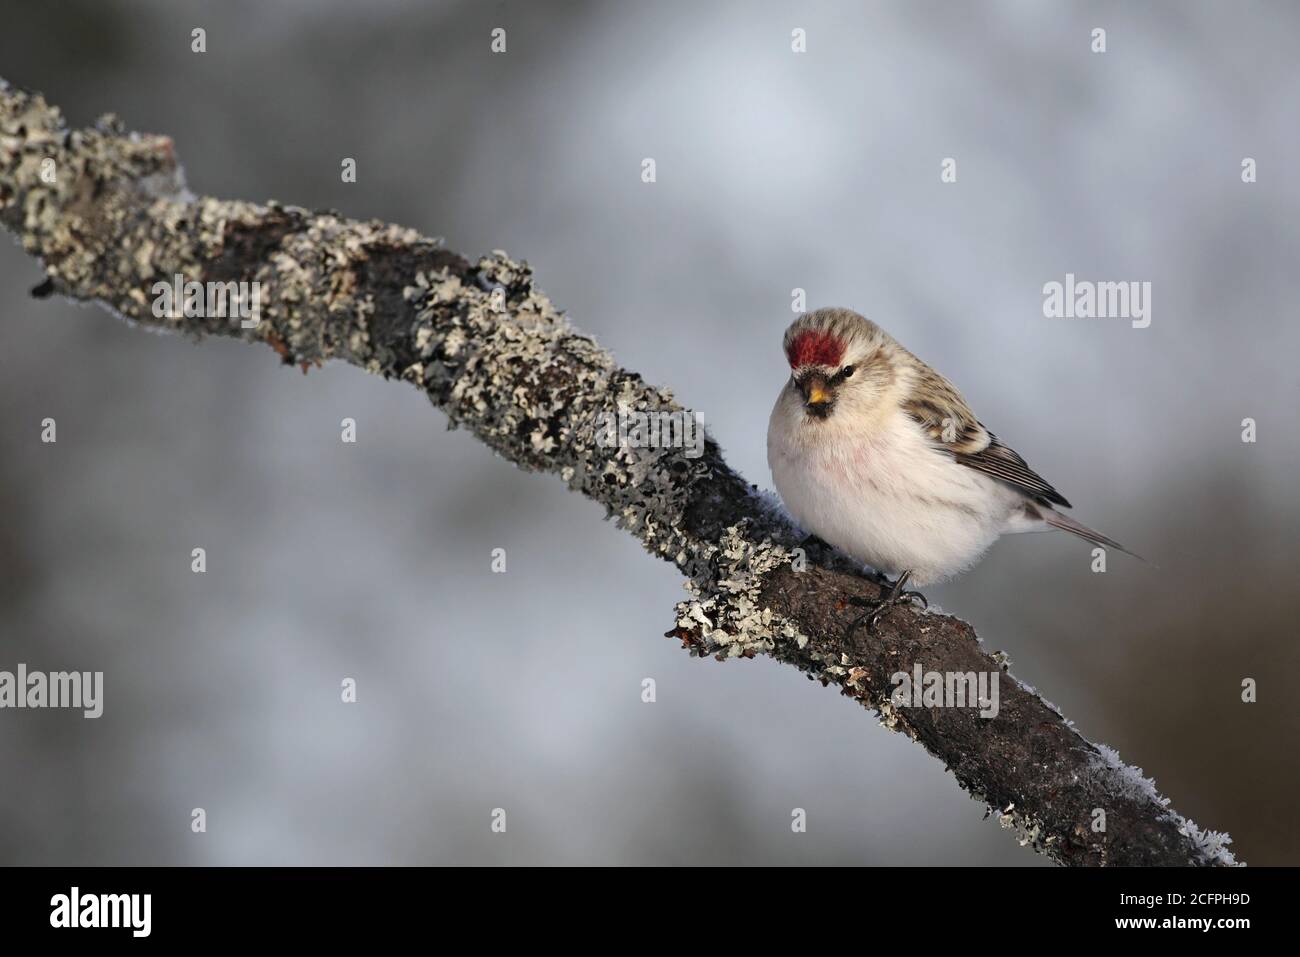 arctic redpoll, hoary redpoll (Carduelis hornemanni exilipes, Acanthis hornemanni exilipes), perched on a branch, Finland, Kaamanen Stock Photo